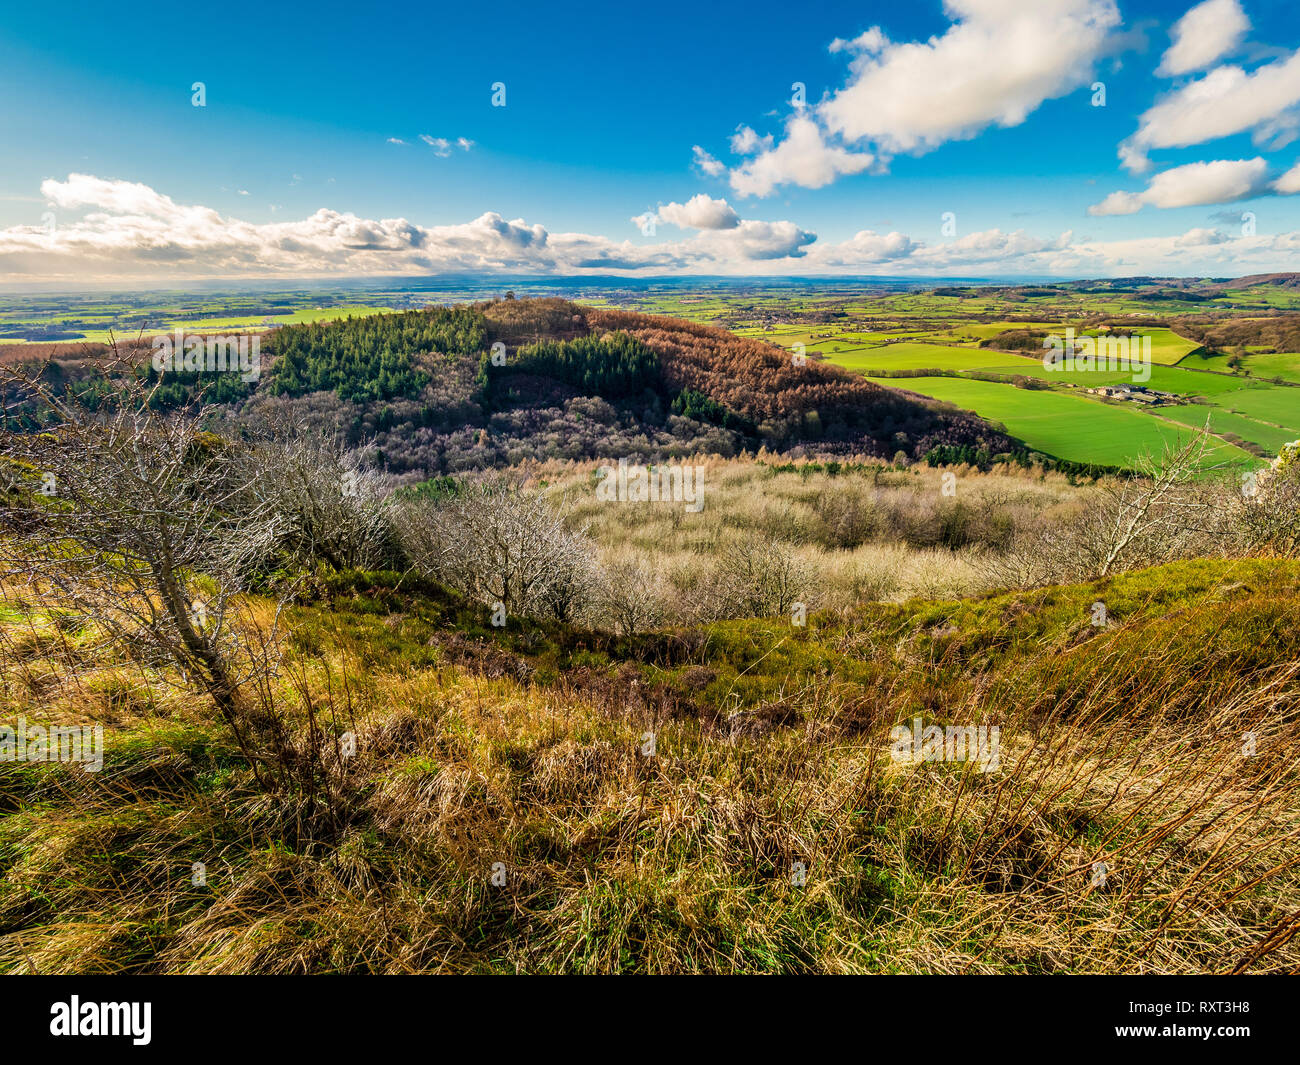 View from the top of Sutton Bank towards Hood Hill, Hambleton Hills, North Yorkshire, UK., Hambleton Hills, North Yorkshire, UK. Stock Photo